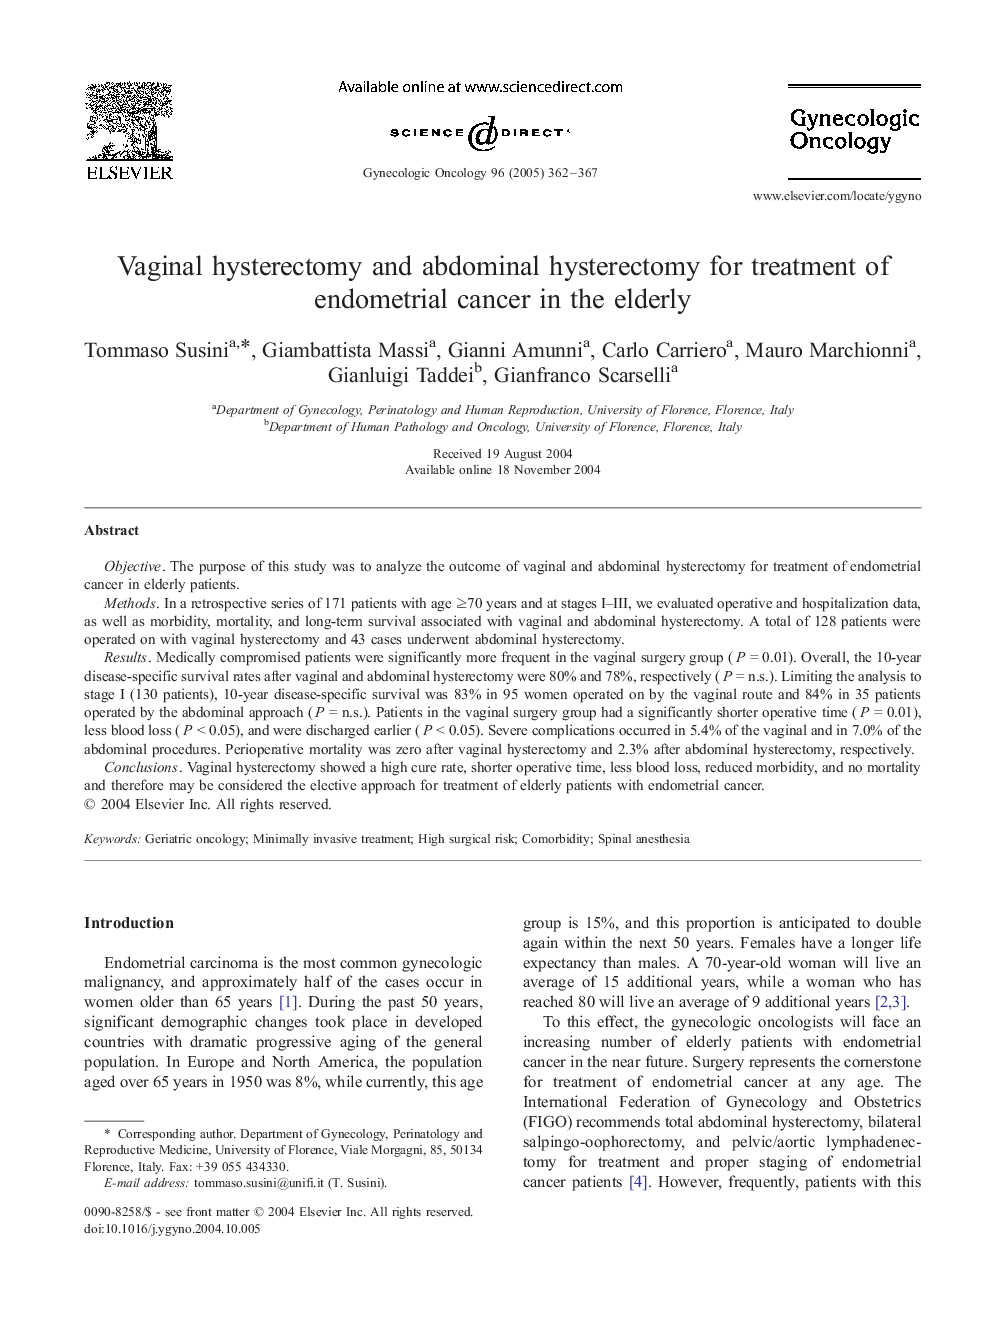 Vaginal hysterectomy and abdominal hysterectomy for treatment of endometrial cancer in the elderly